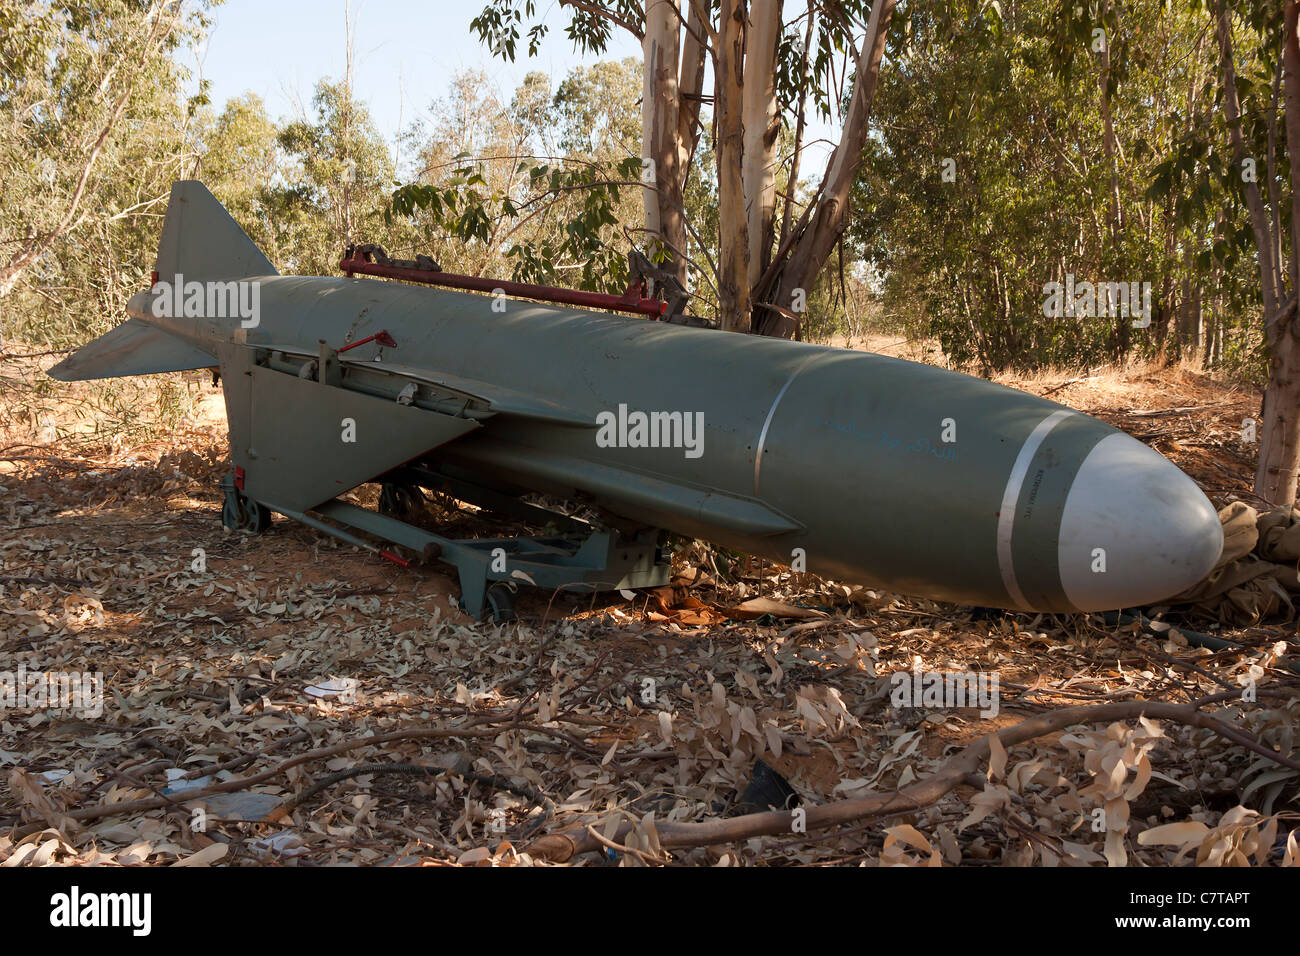 P 21 Styx  radar guided cruise missile used by Col Gaddafi conflict war civil Qaddafi weapon Stock Photo